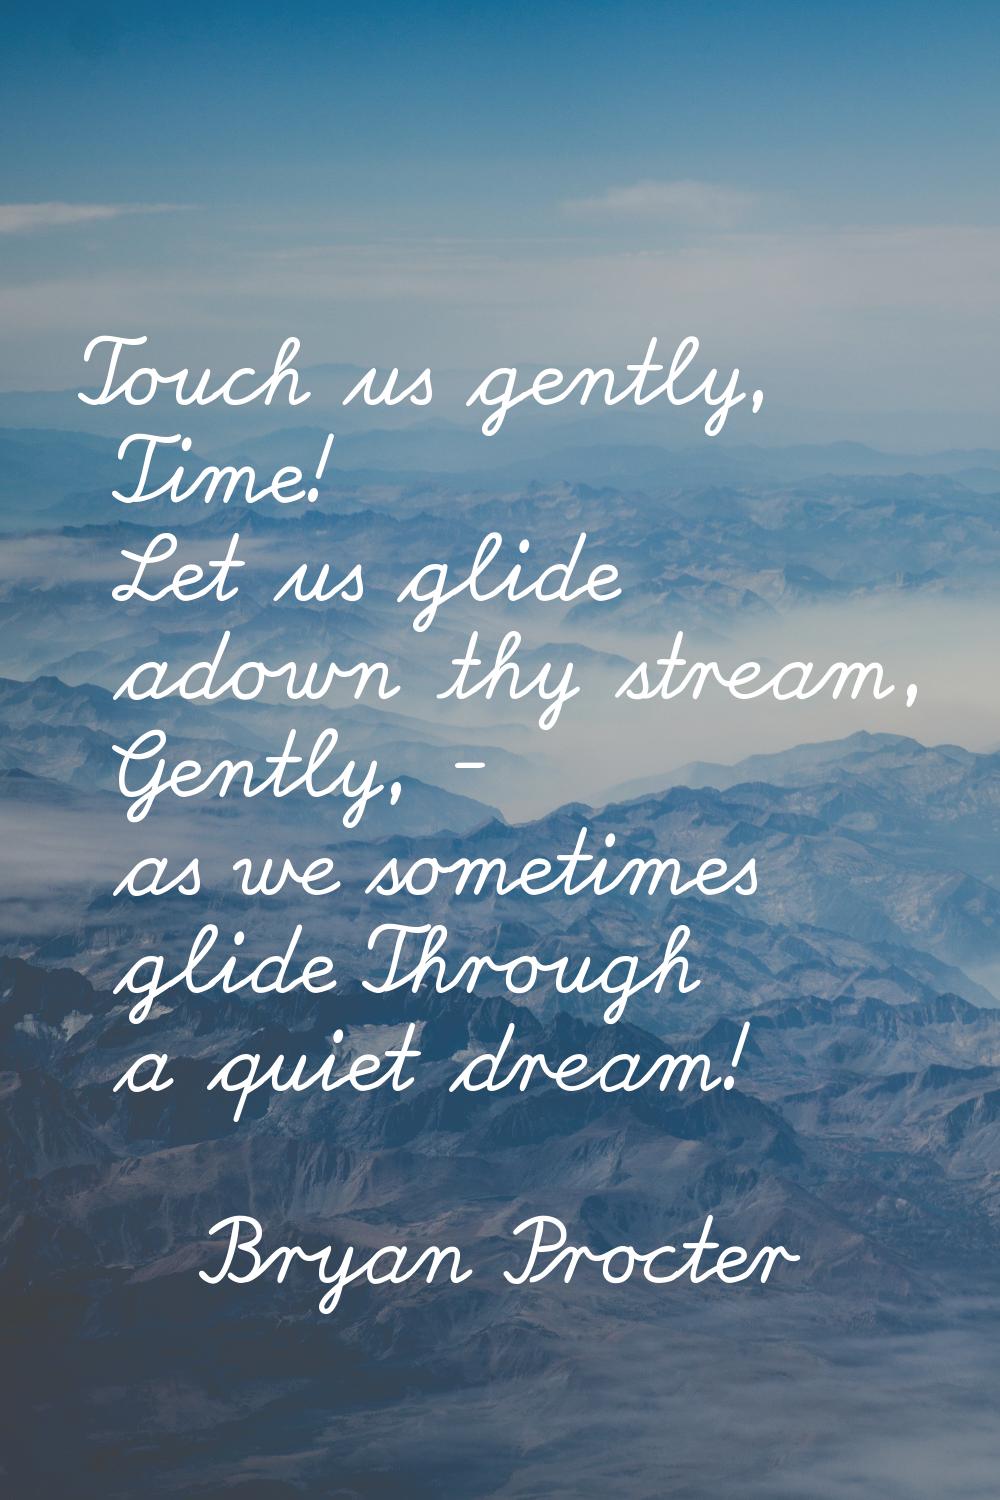 Touch us gently, Time! Let us glide adown thy stream, Gently, - as we sometimes glide Through a qui